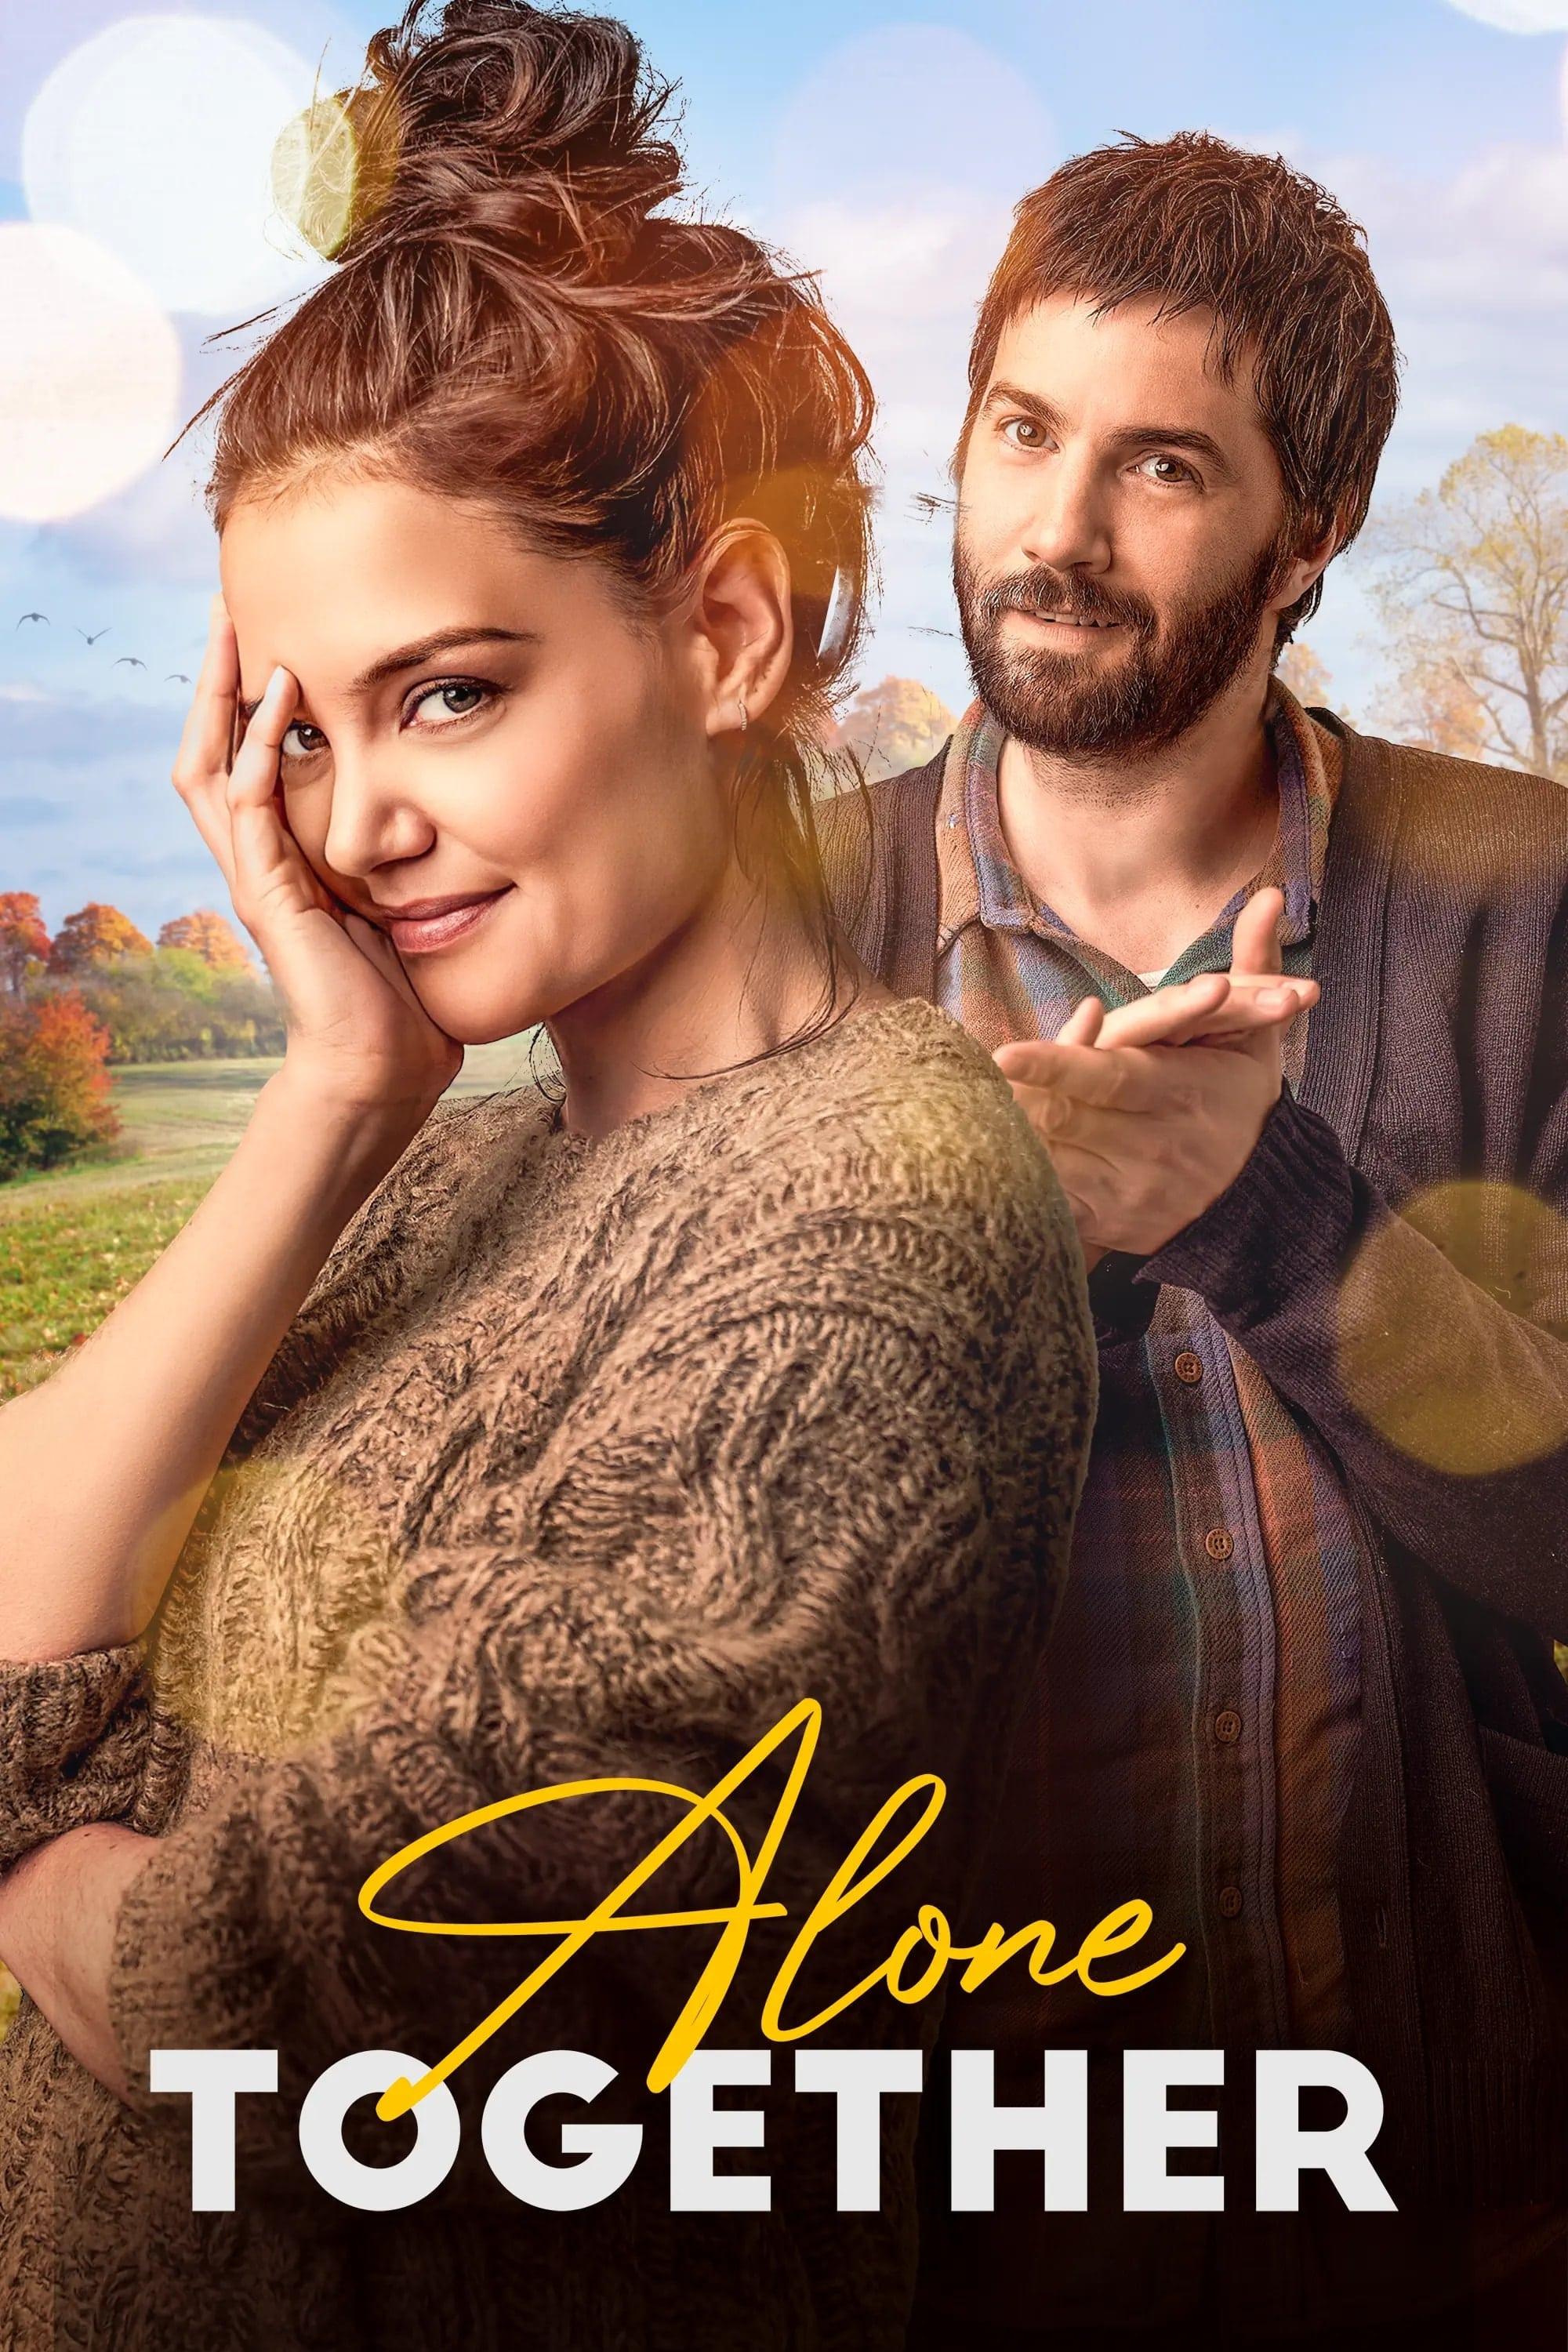 Alone Together poster